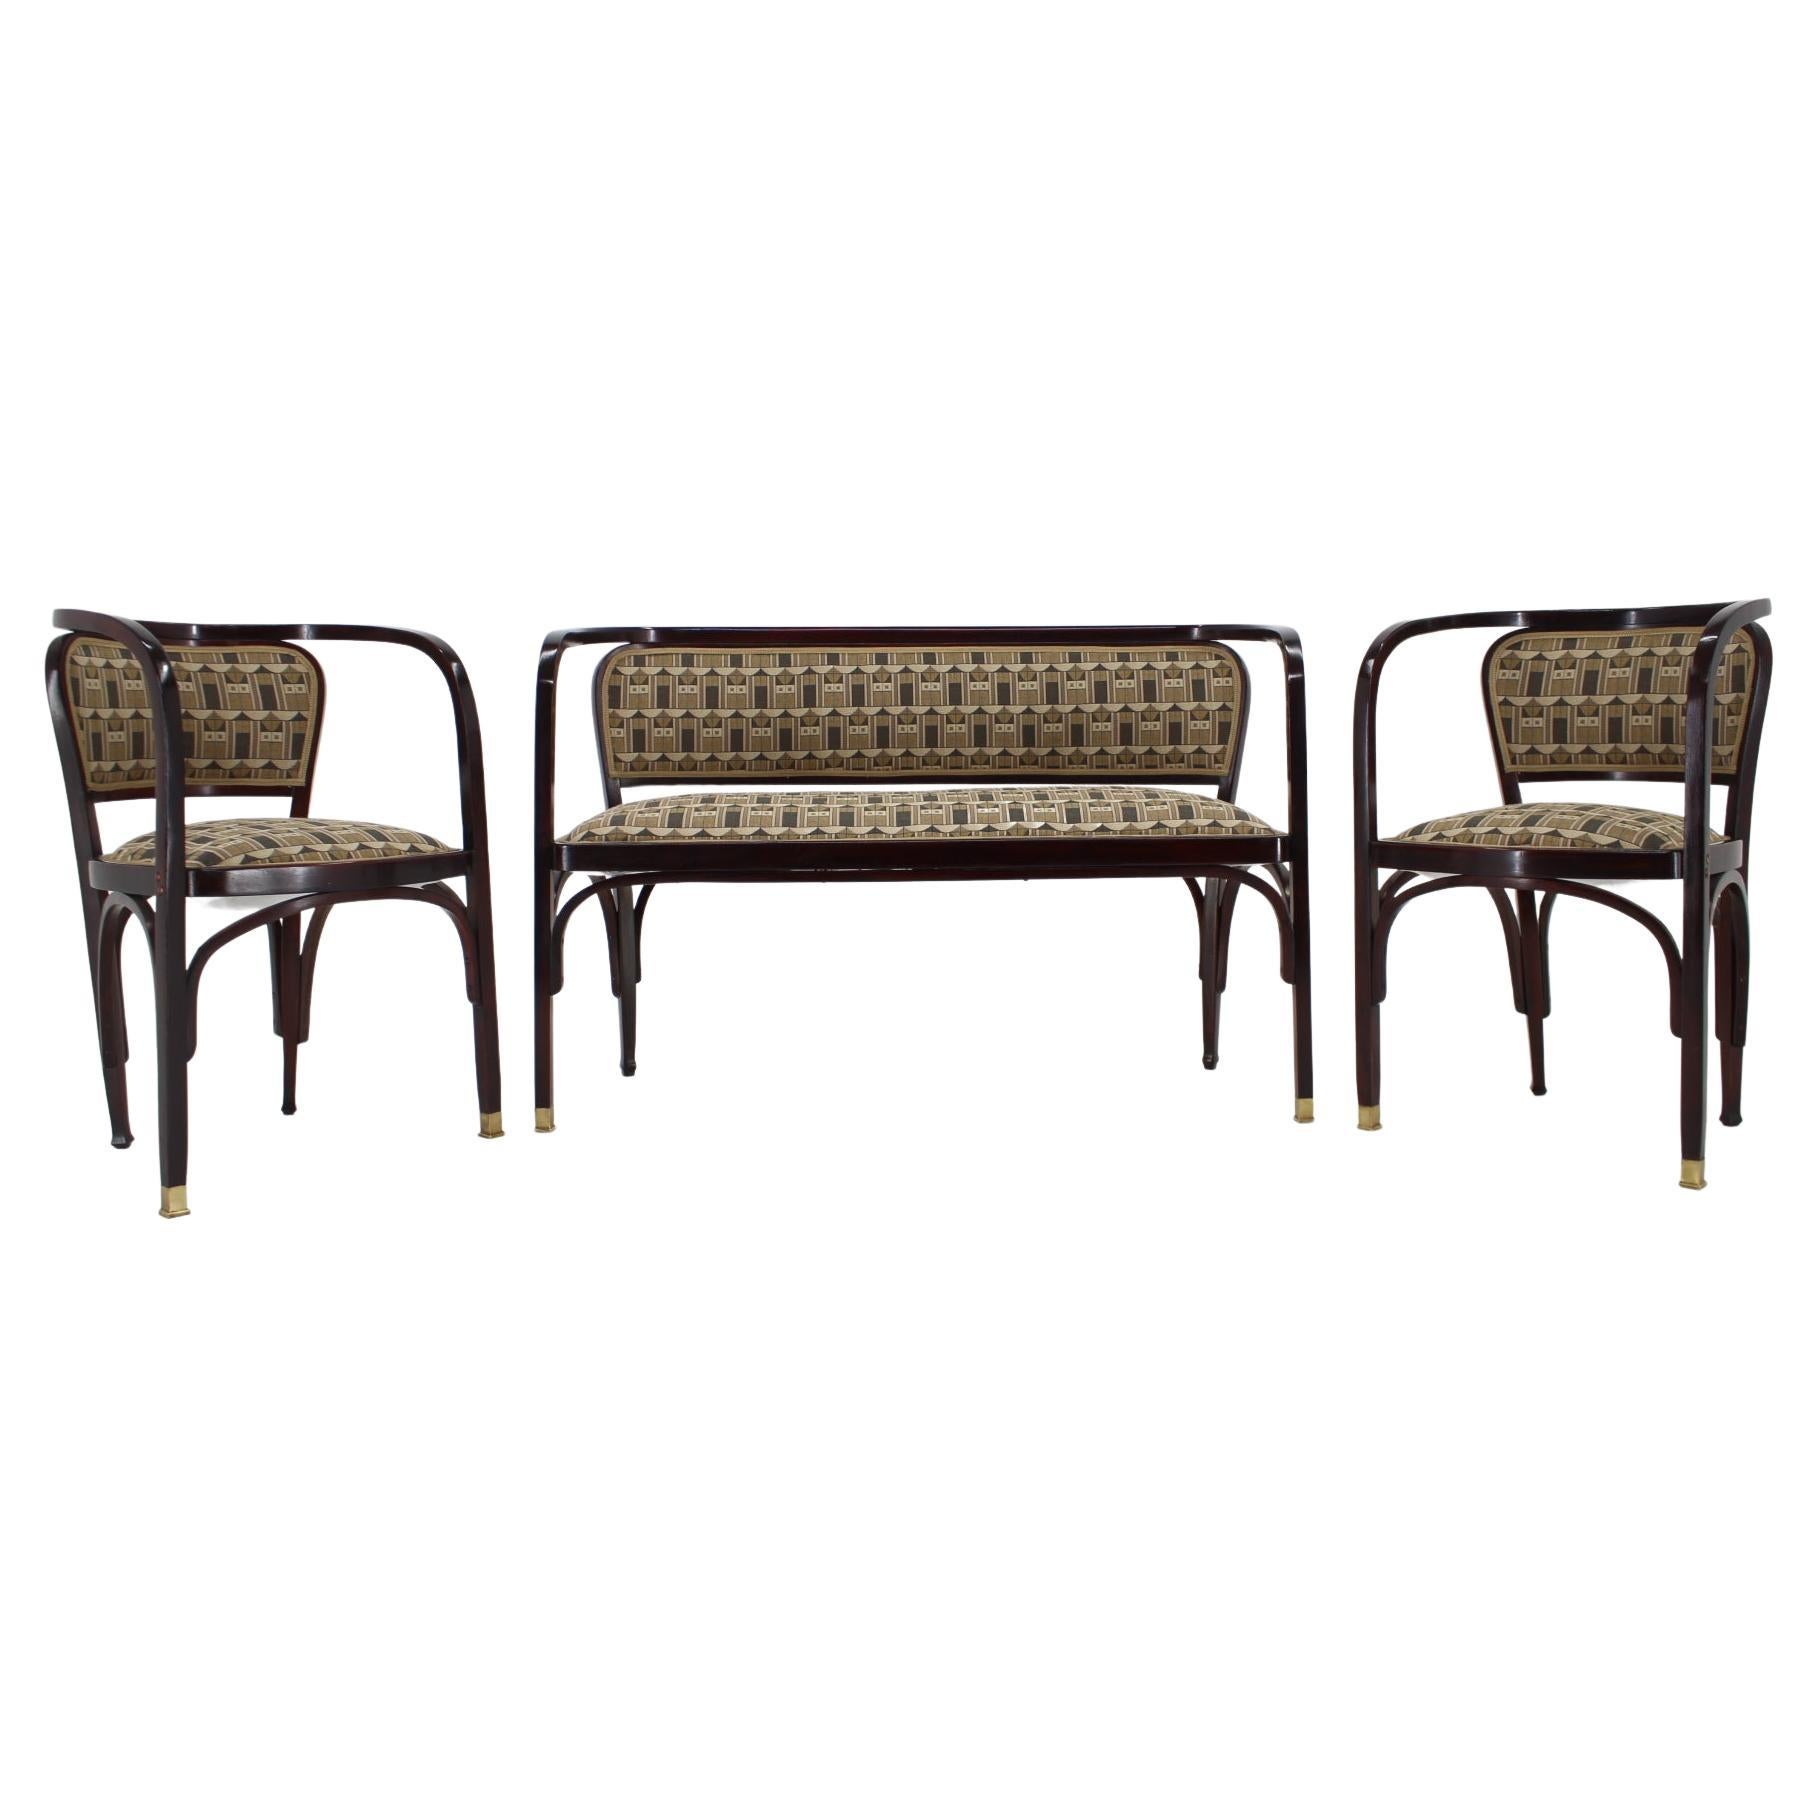 Secession Sofa and Two Armchairs by Gustav Siegel for J.J.Kohn, Restored 